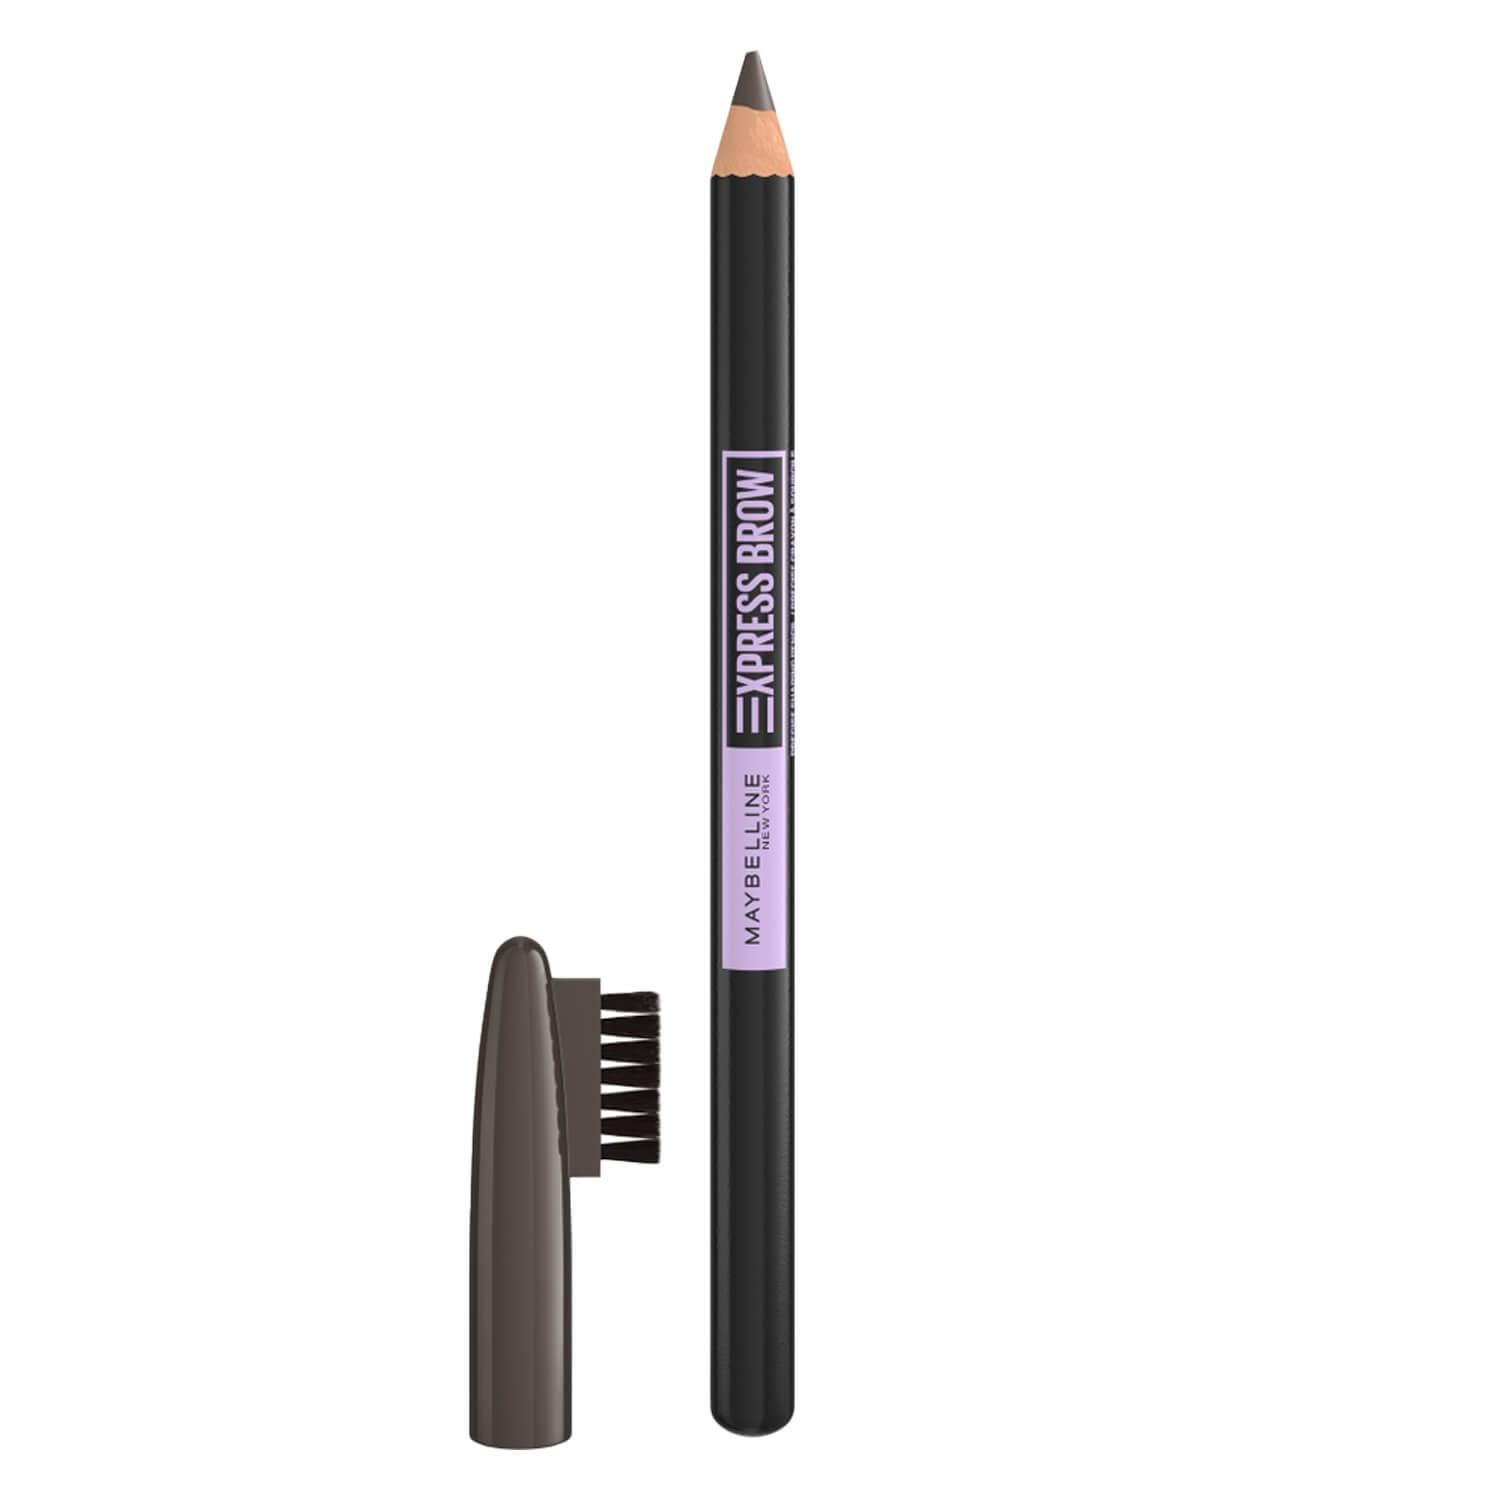 Maybelline NY Brows - Express Brow Precise Shaping 05 Deep Brown